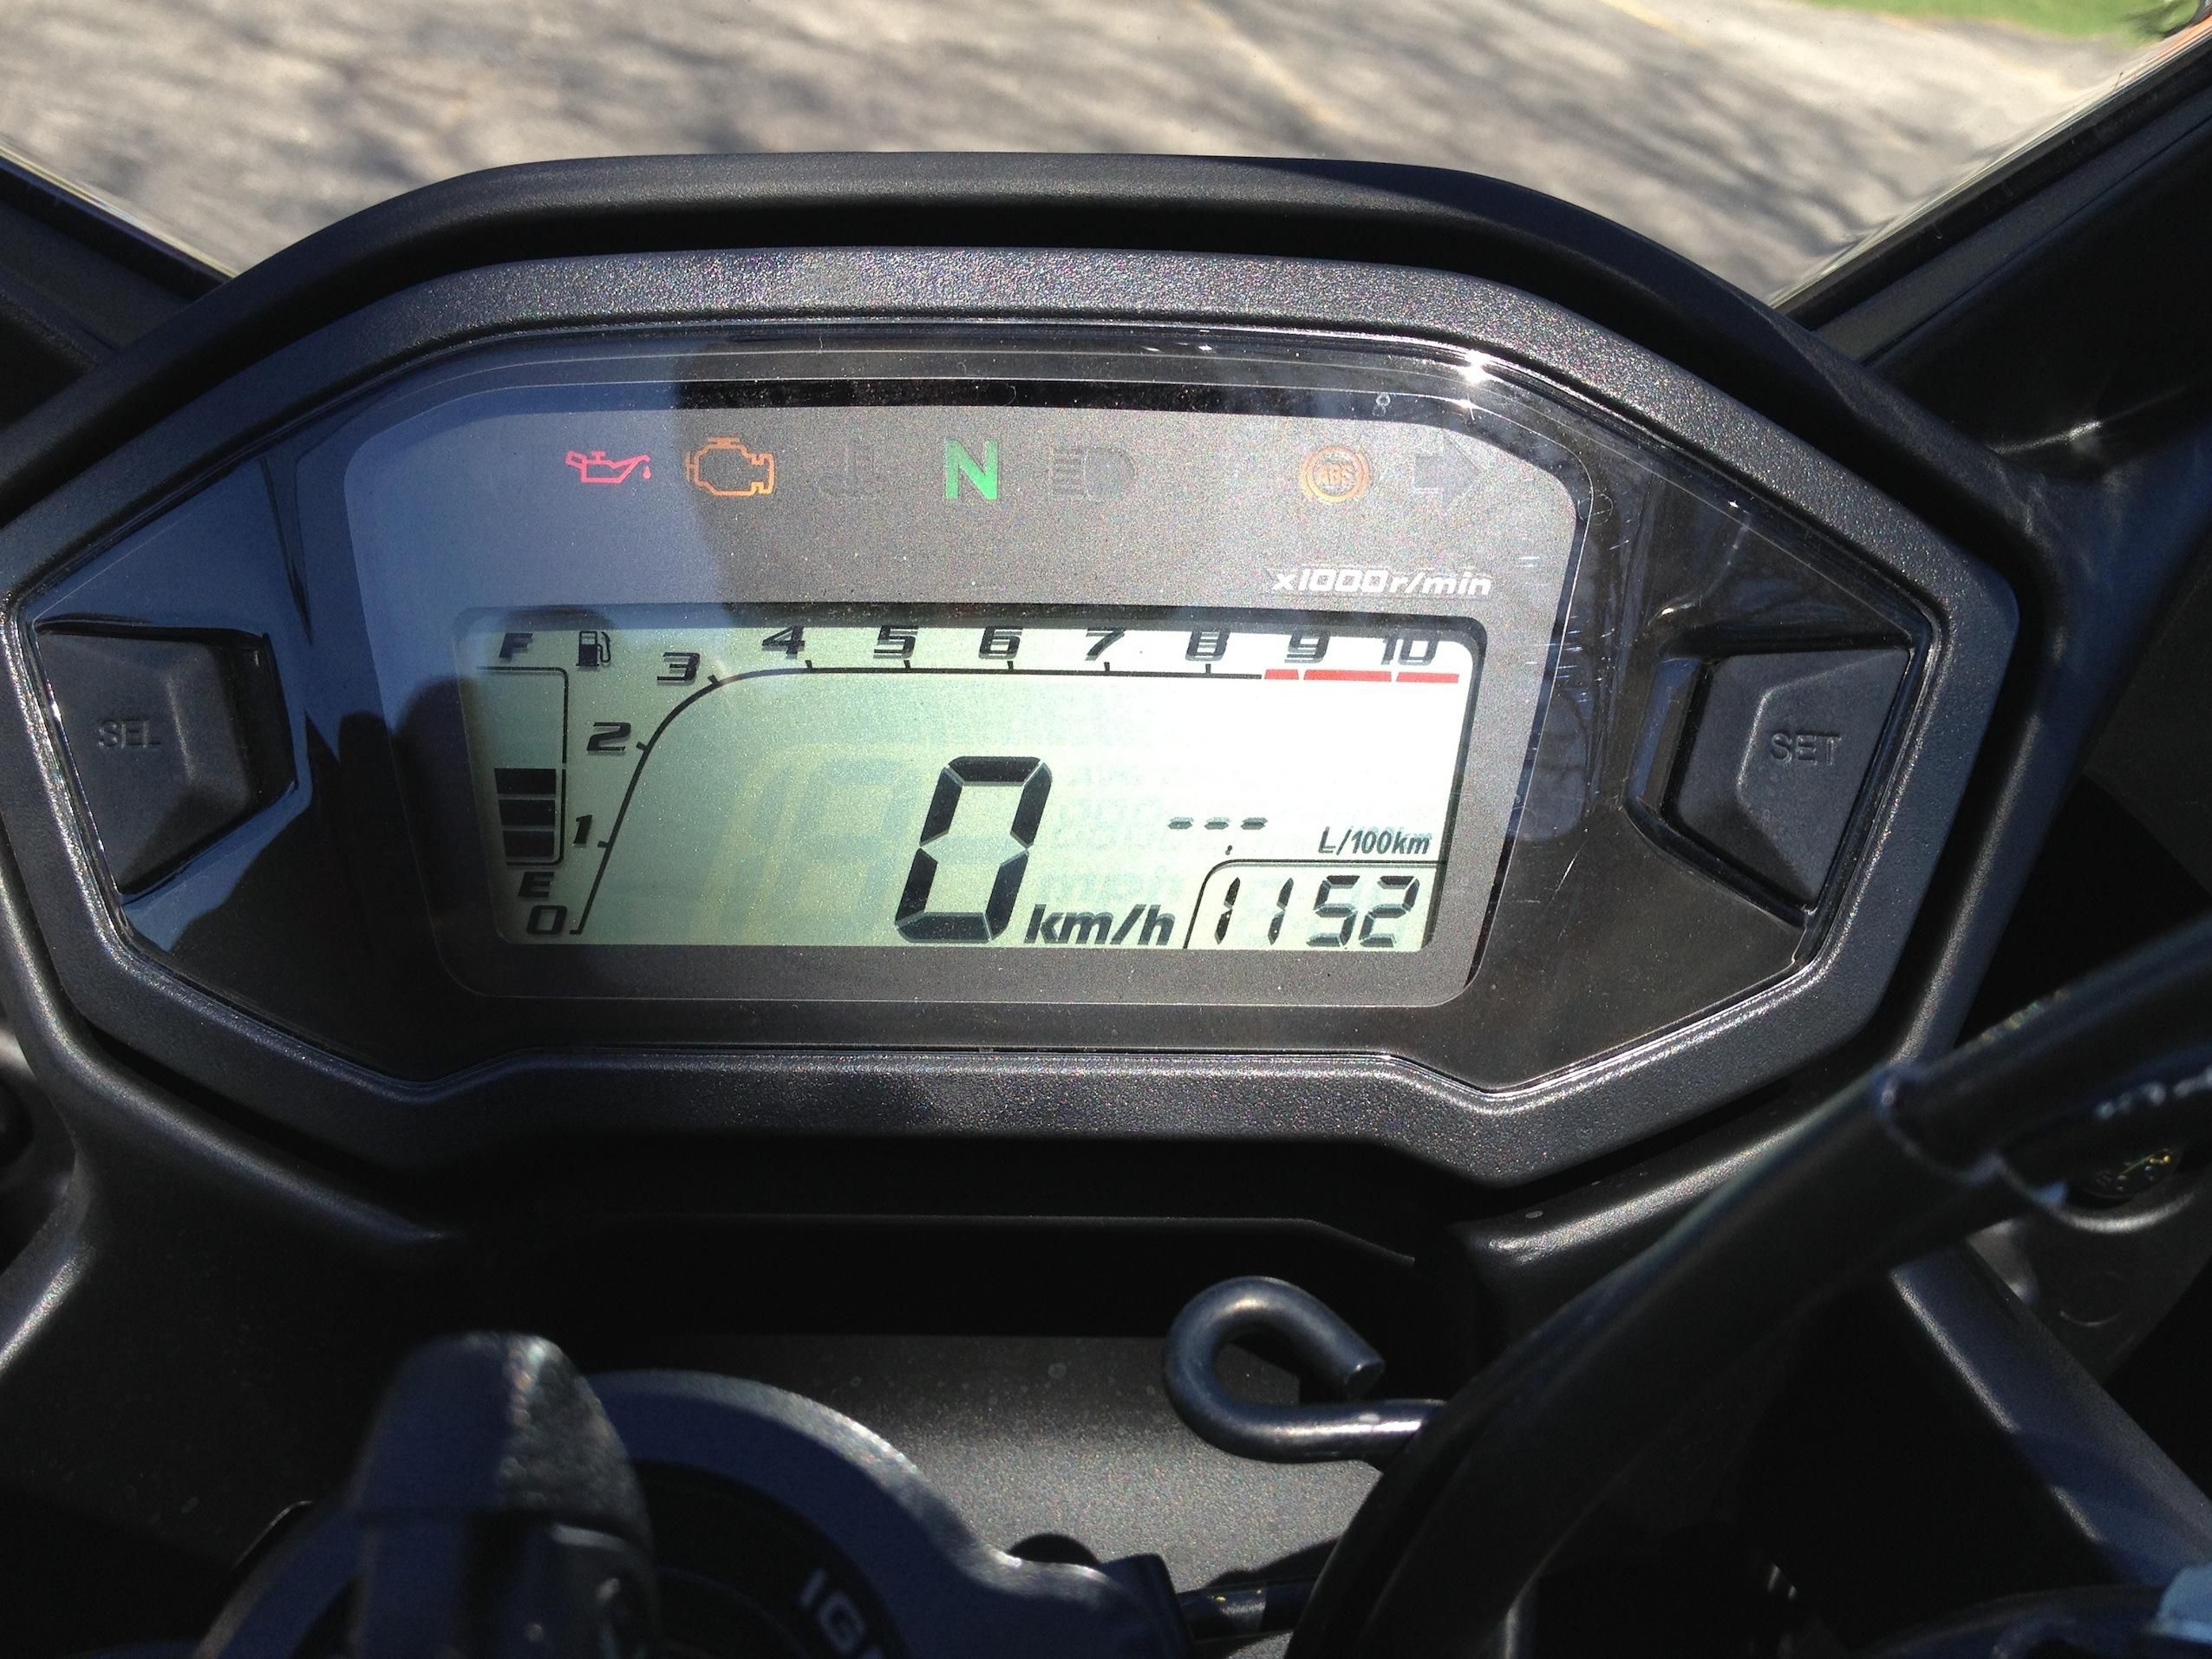 The details matter - The CB500F dash is easy to read and highly functional